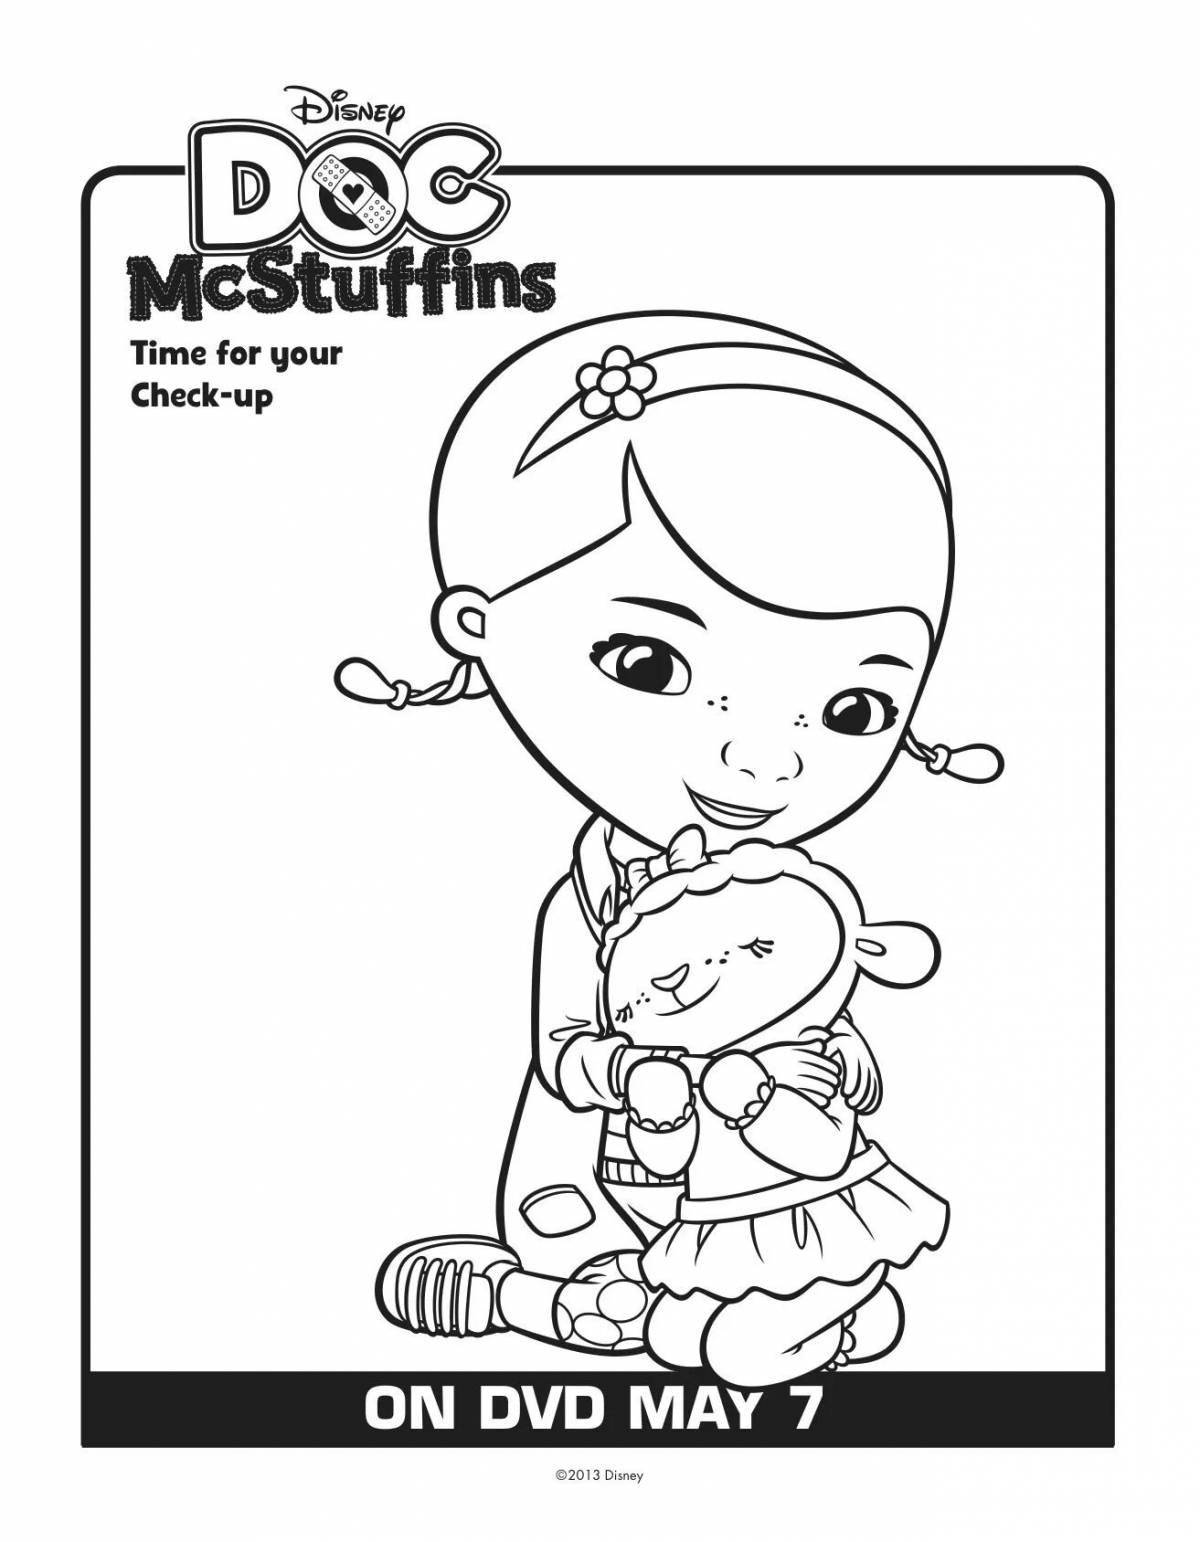 Delightful Doctor Plush Coloring Book for Kids